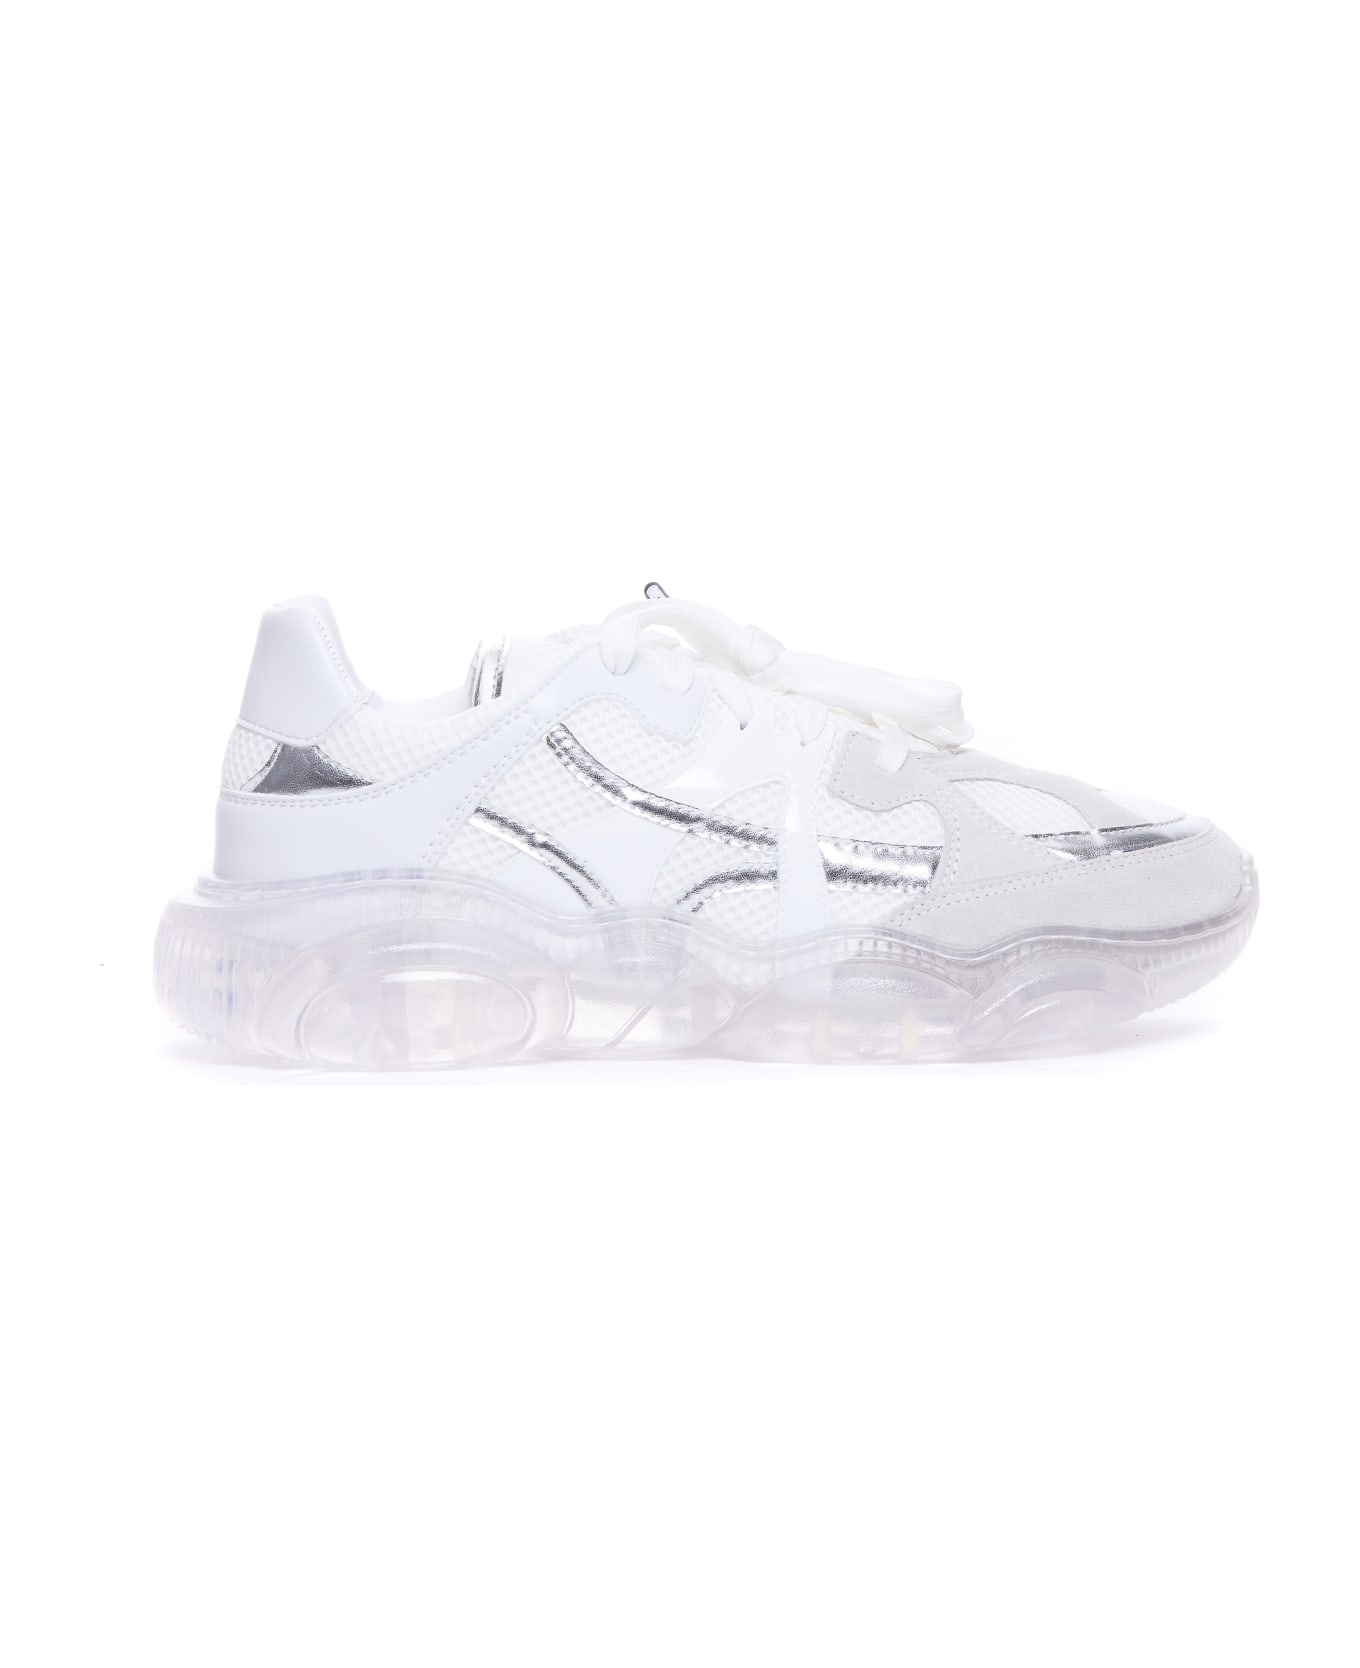 Moschino Teddy Shoes With Transparent Sole - White